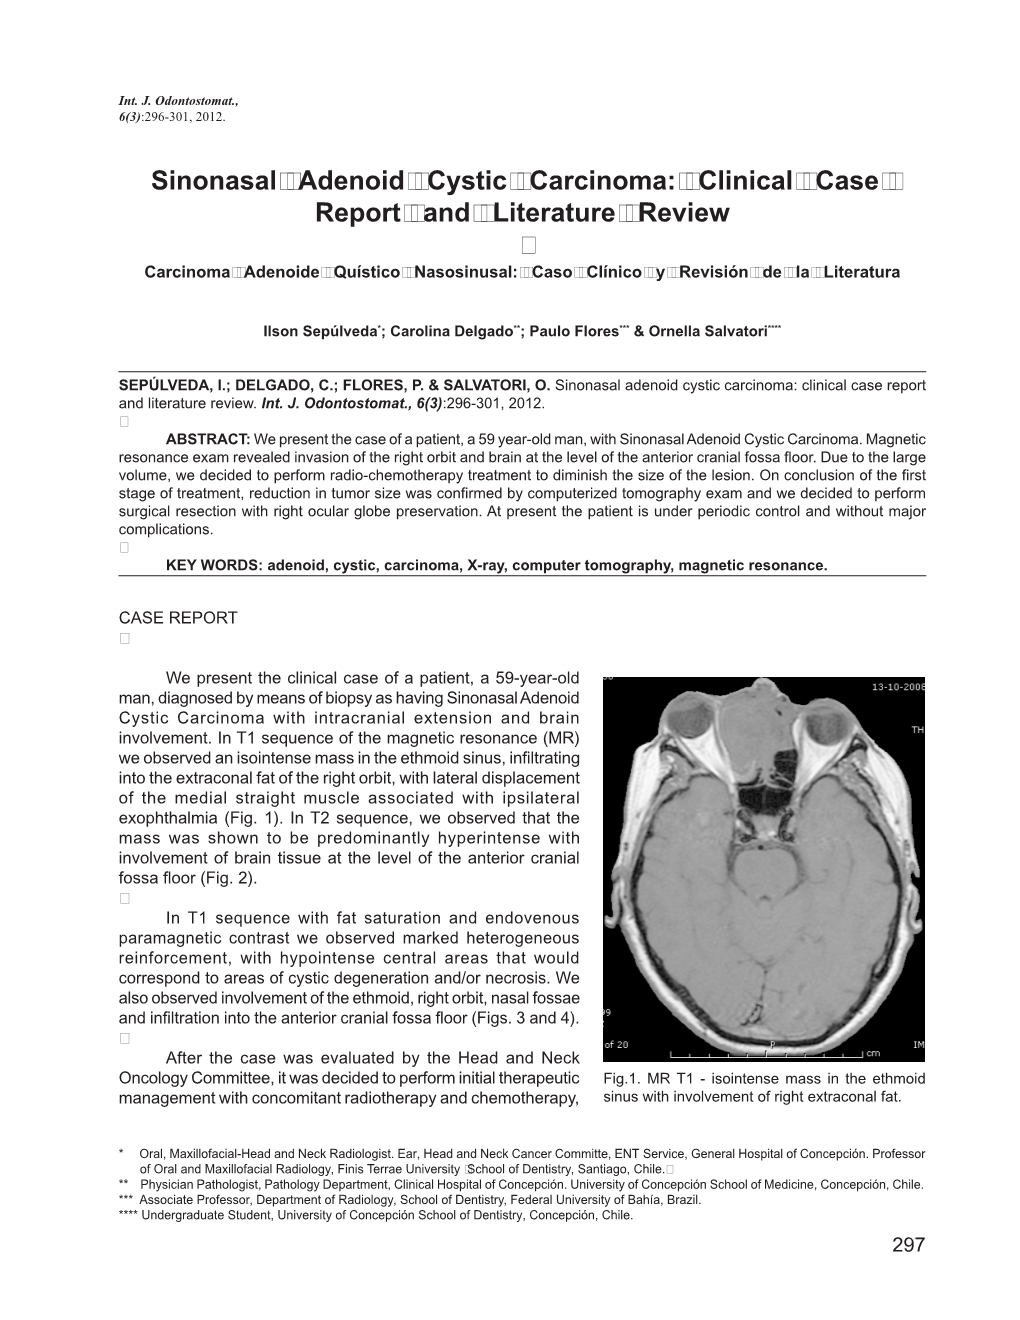 Sinonasal Adenoid Cystic Carcinoma: Clinical Case Report and Literature Review